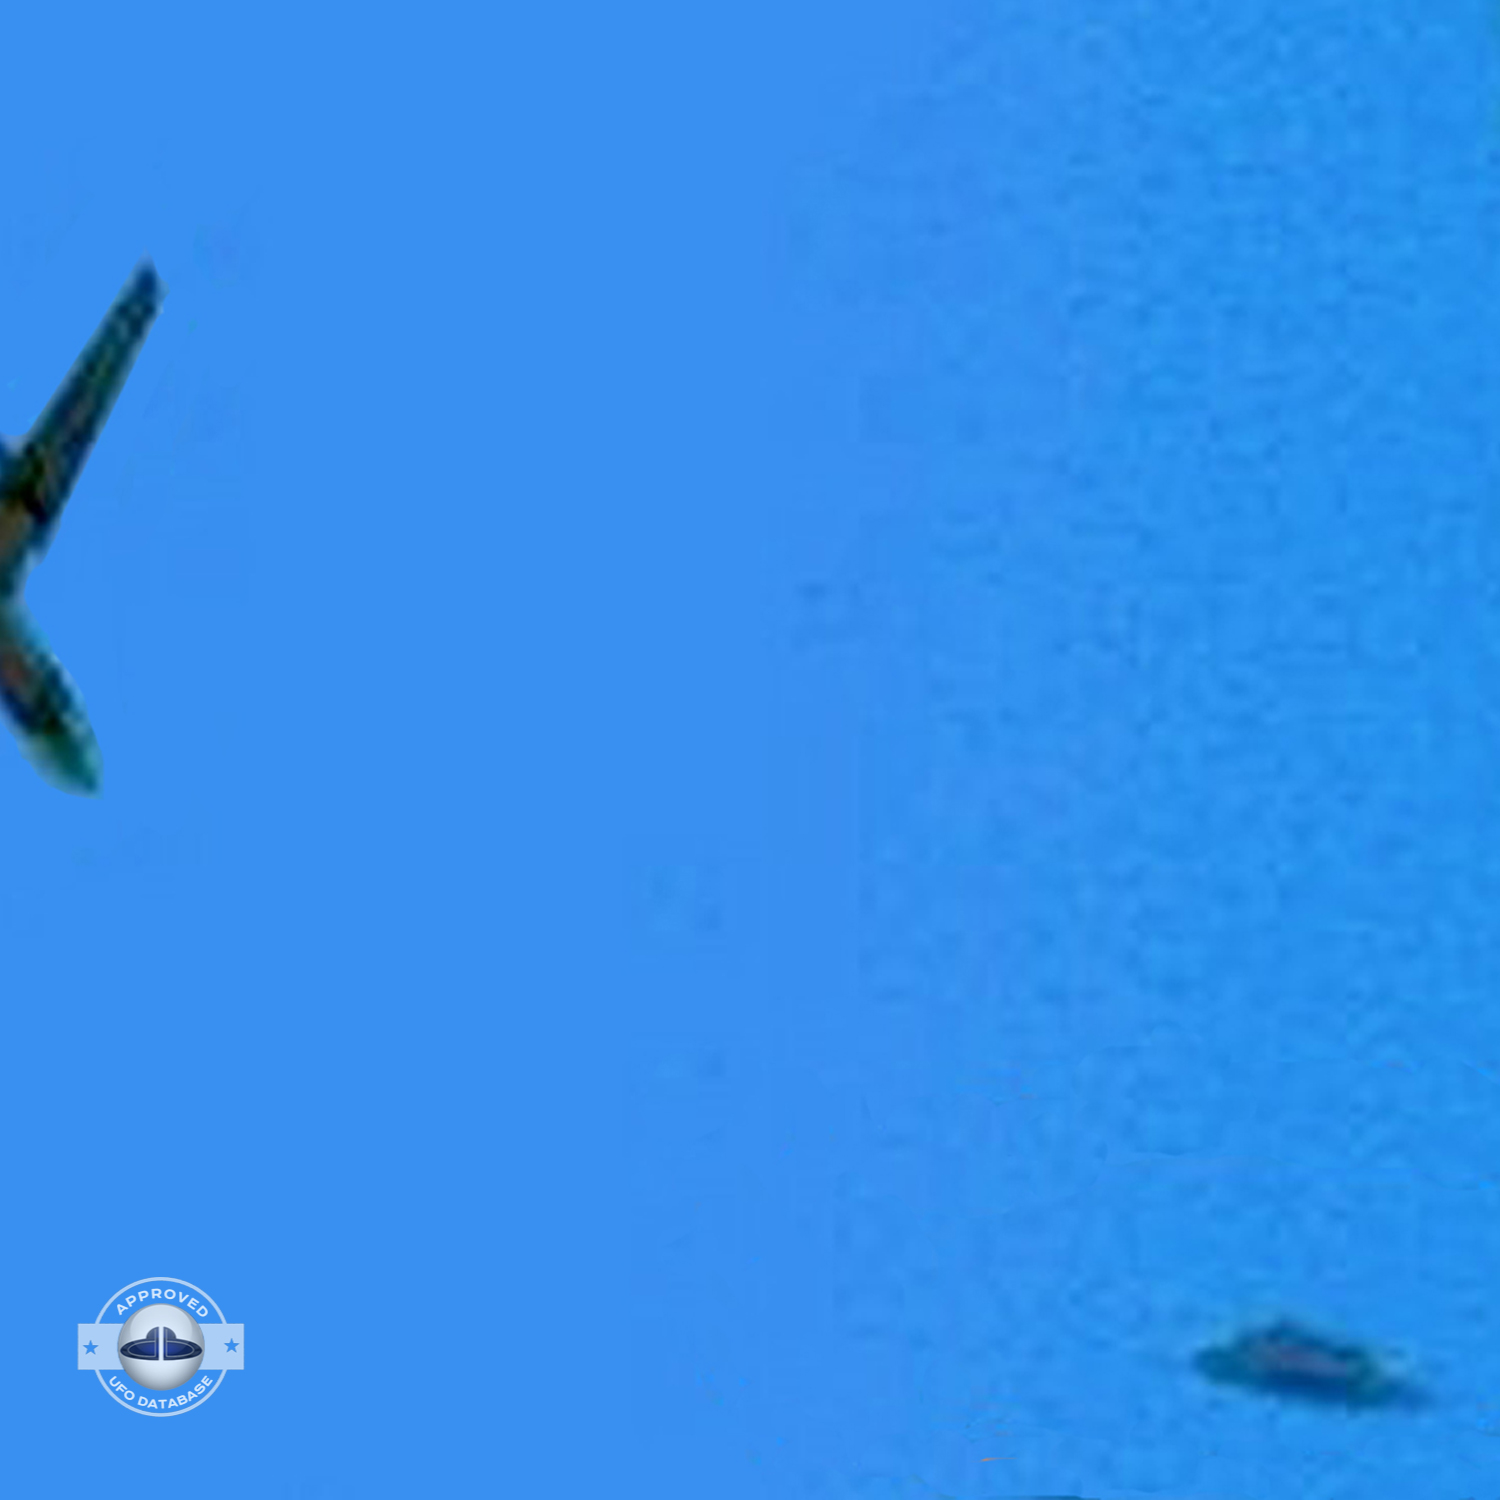 Picture of UFO near airplane over Vnukovo Airport | Moscow, Russia UFO Picture #179-3